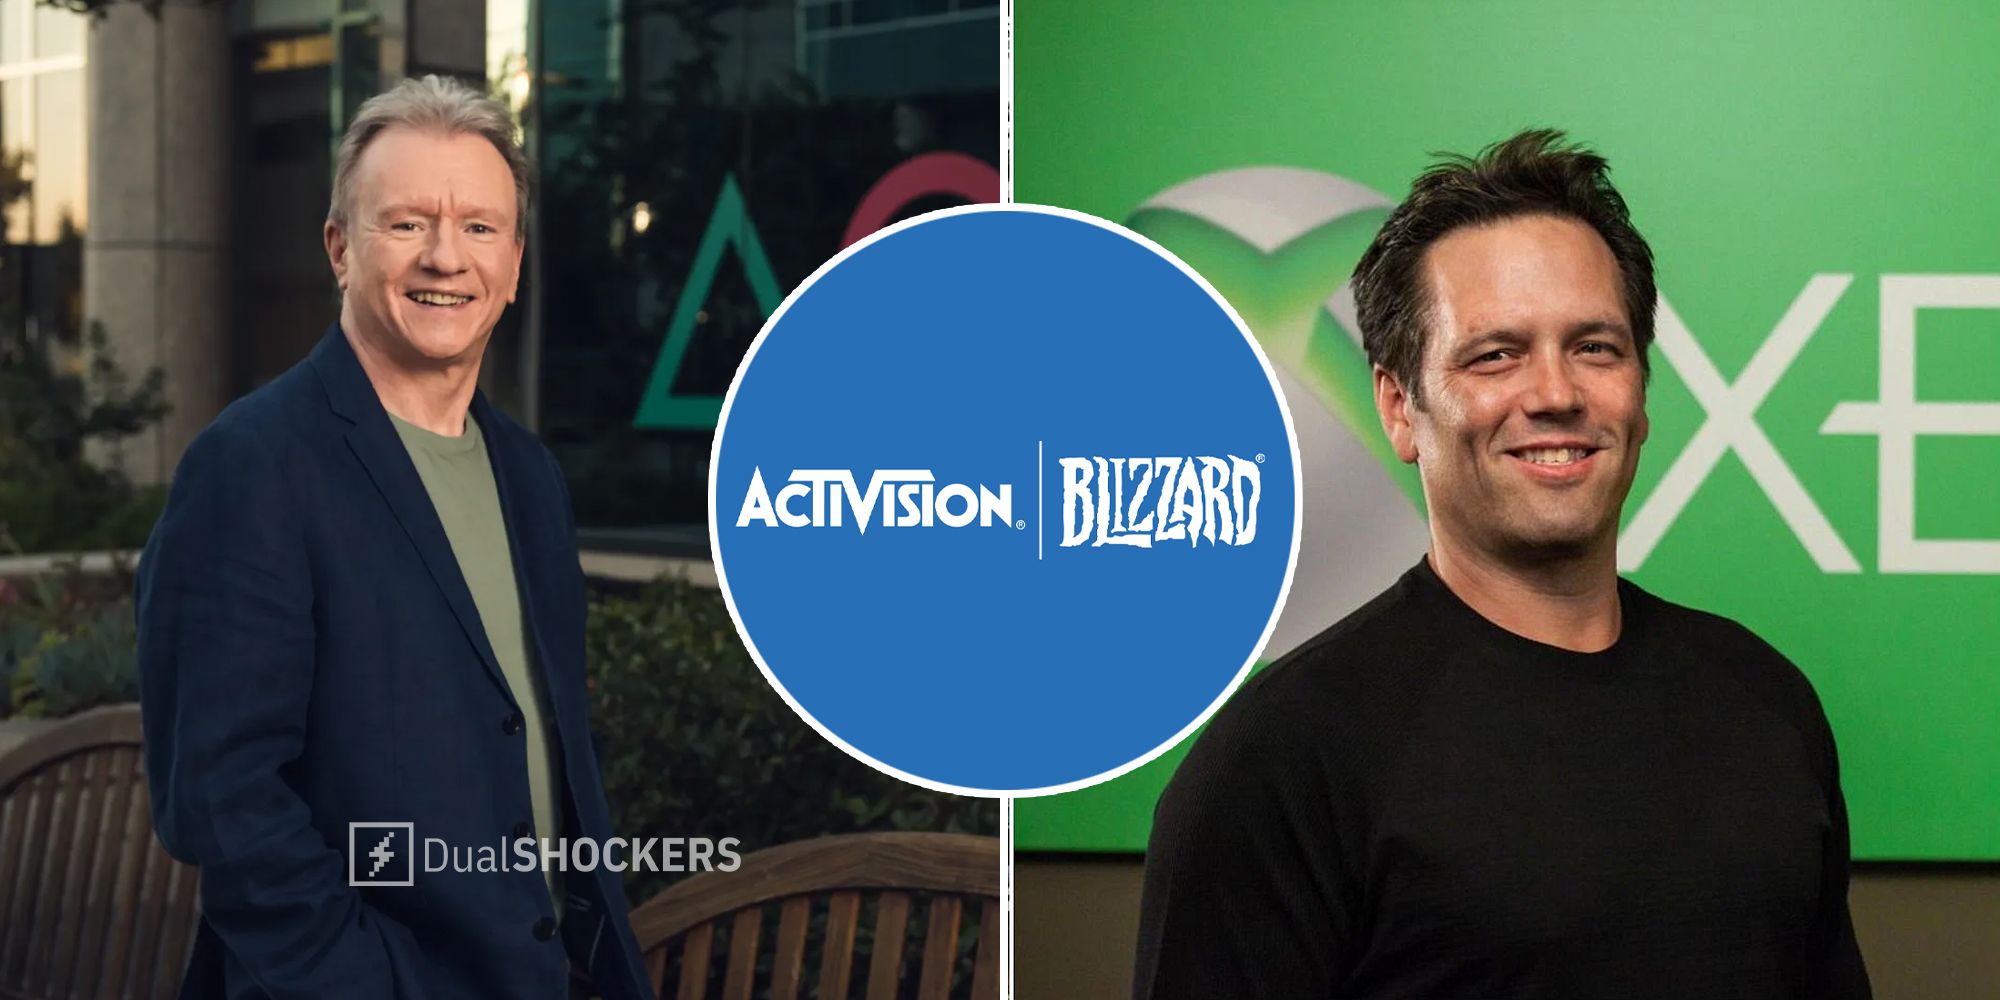 Jim Ryan of Playstation, Activision Blizzard logo, Phil Spencer of Xbox